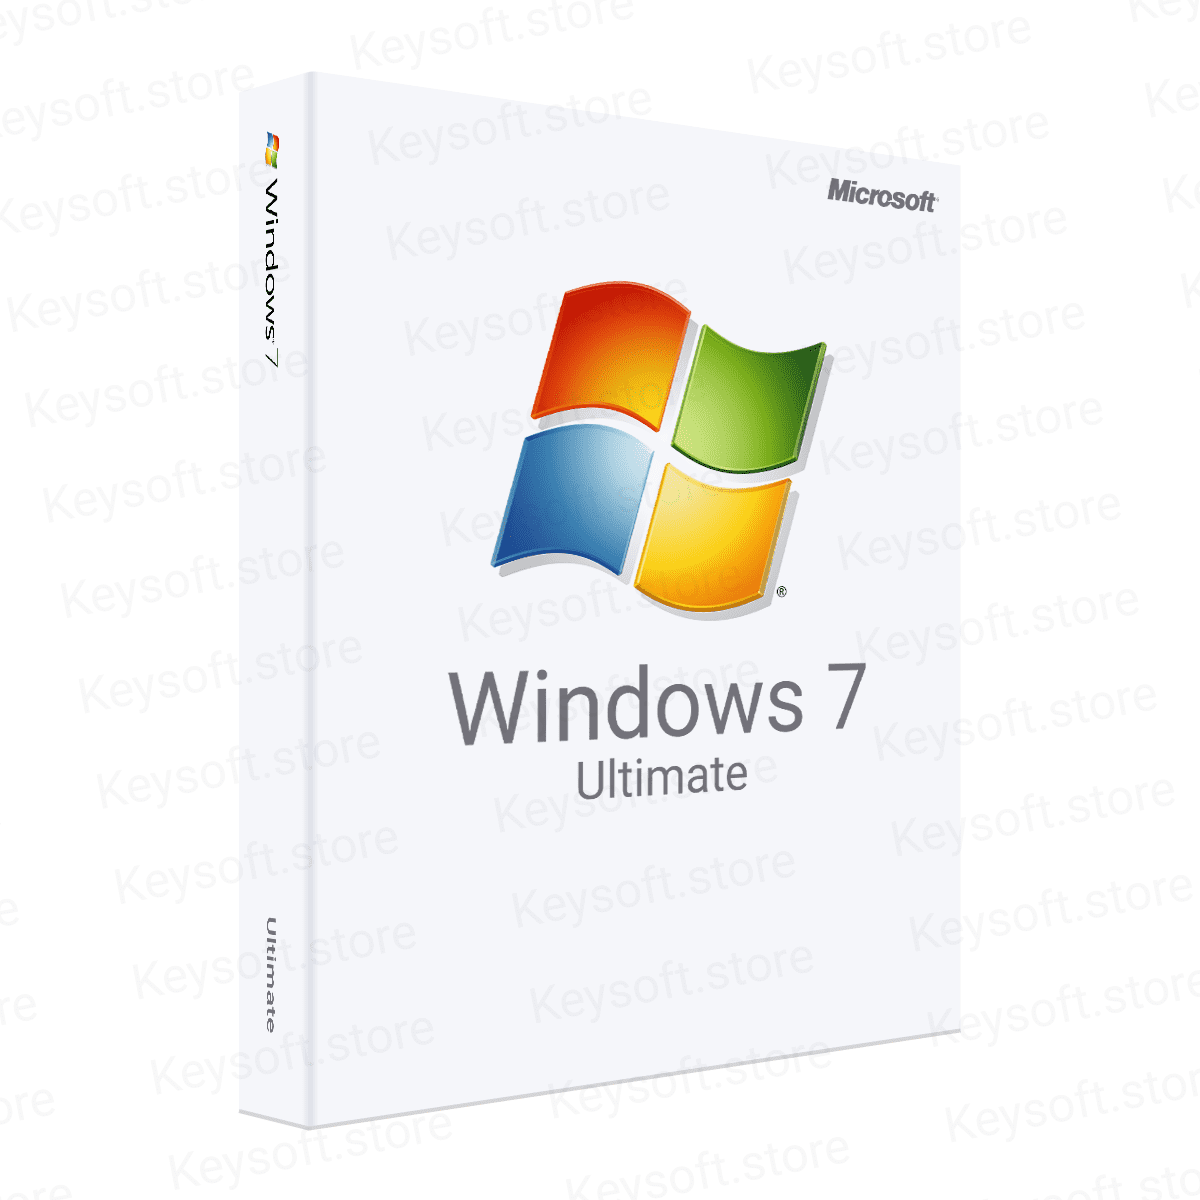 UpdatePack7R2 23.7.12 instal the new version for windows